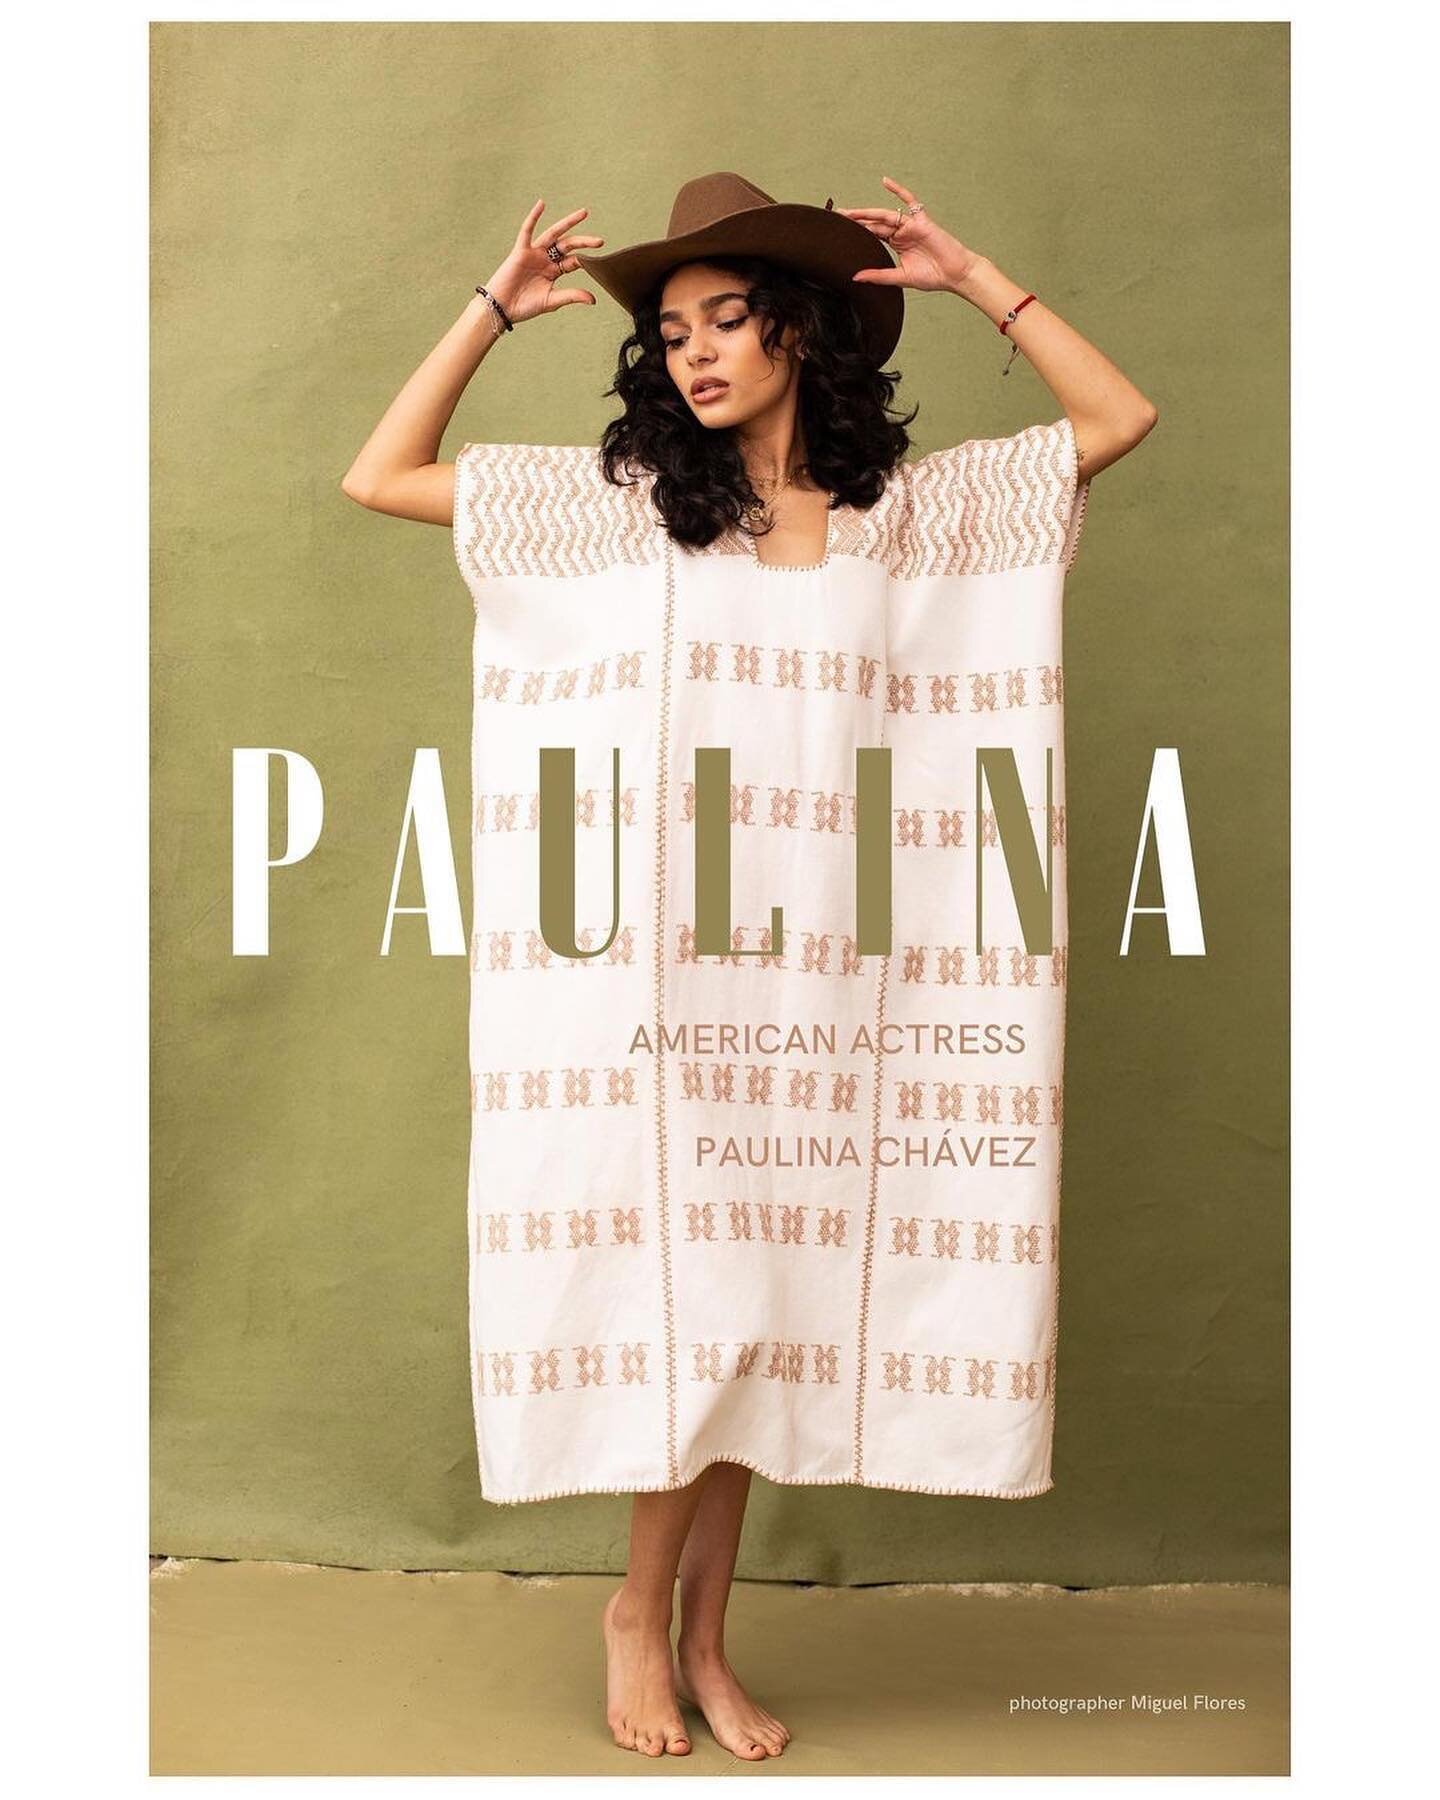 PAULINA
actress Paulina Ch&aacute;vez
San Antonio, Texas

Actress Paulina Ch&aacute;vez [Fate : The Winx Saga on Netflix &amp; other series &amp; movies] celebrates her cultural roots in this breathtaking portrait series by photographer Miguel Flores